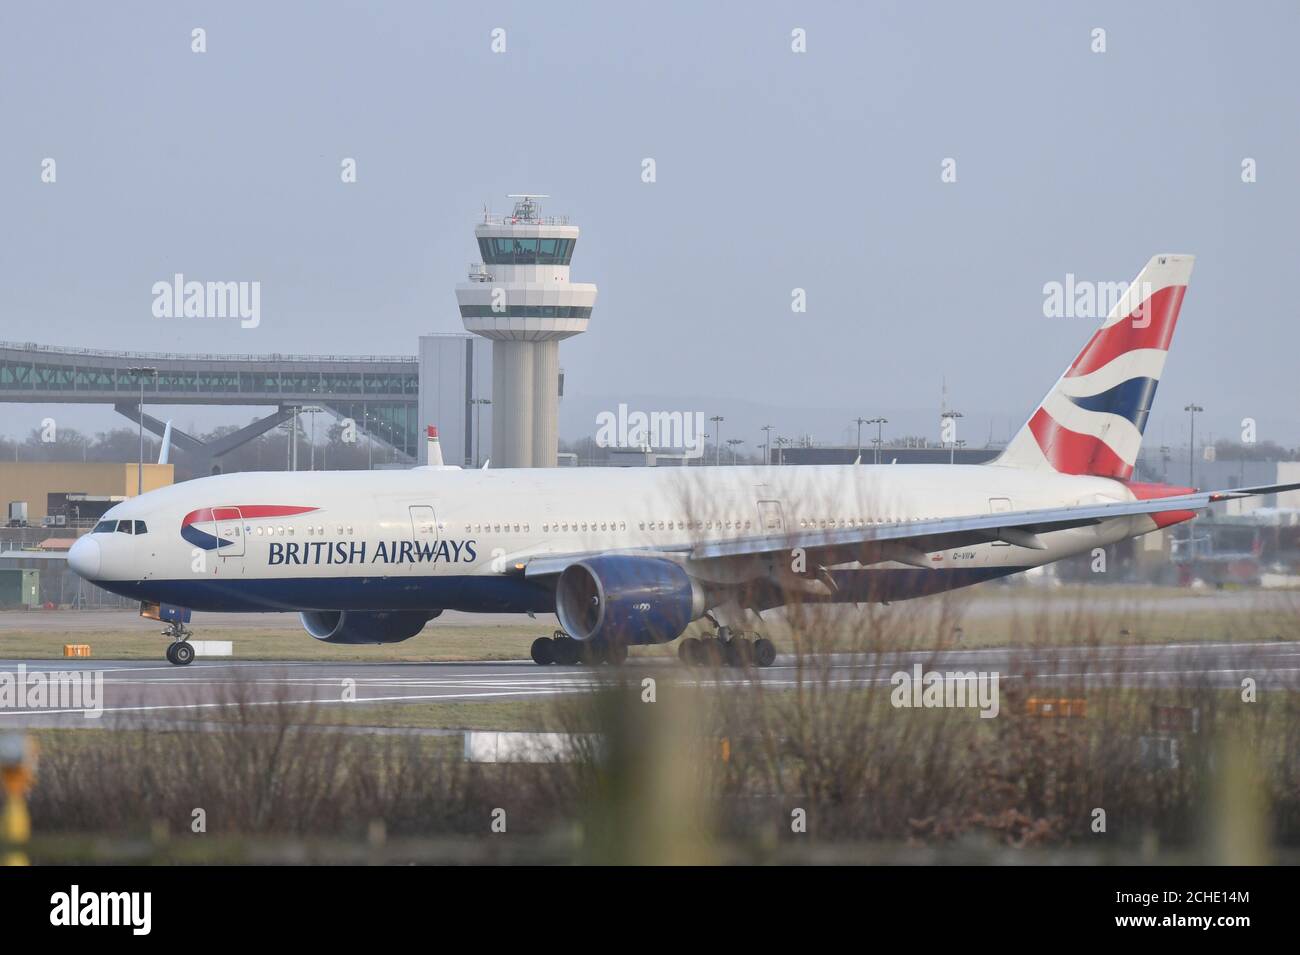 A British Airways plane lands at Gatwick airport which had been closed after drones were spotted over the airfield Wednesday night and throughout Thursday. Stock Photo